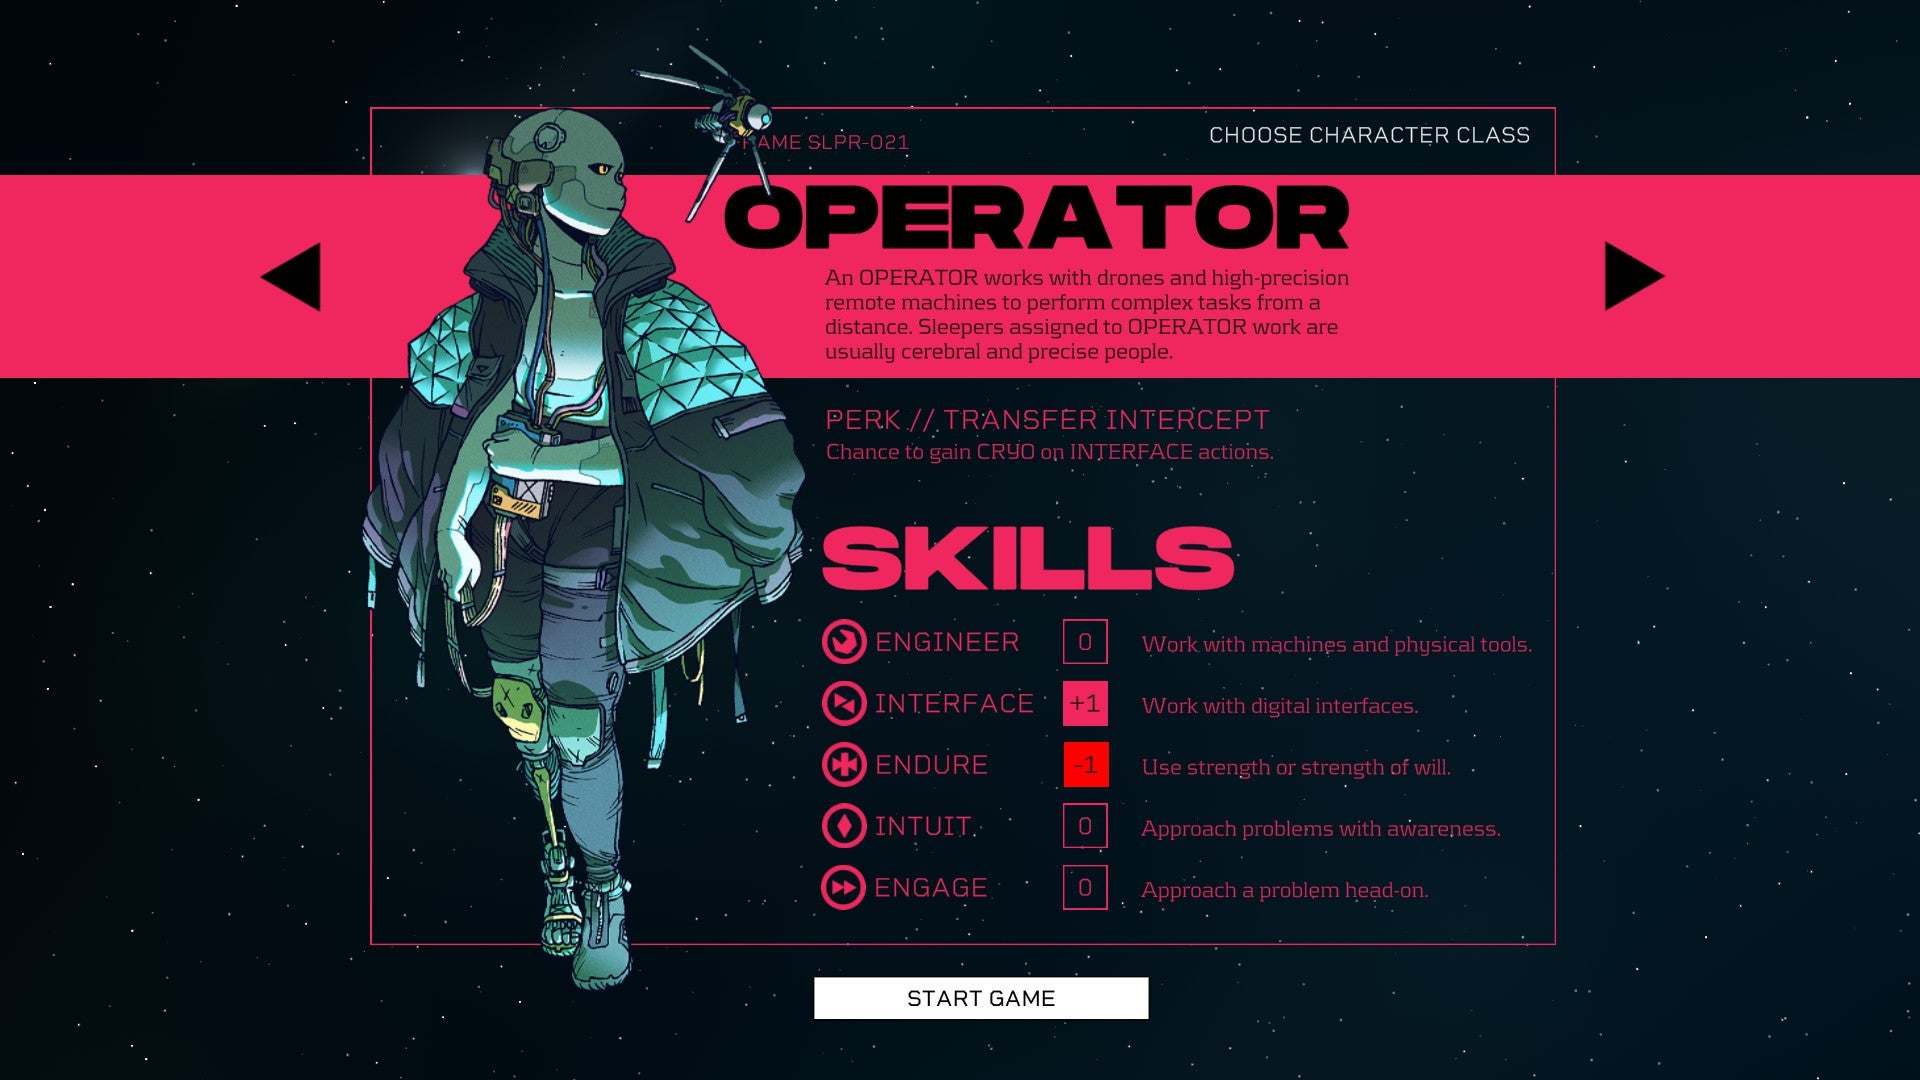 Citizen Sleeper review - character sheet for the Operator class. Character art on the left, skills on the right, with boosts to Interface and reduction to Endure.